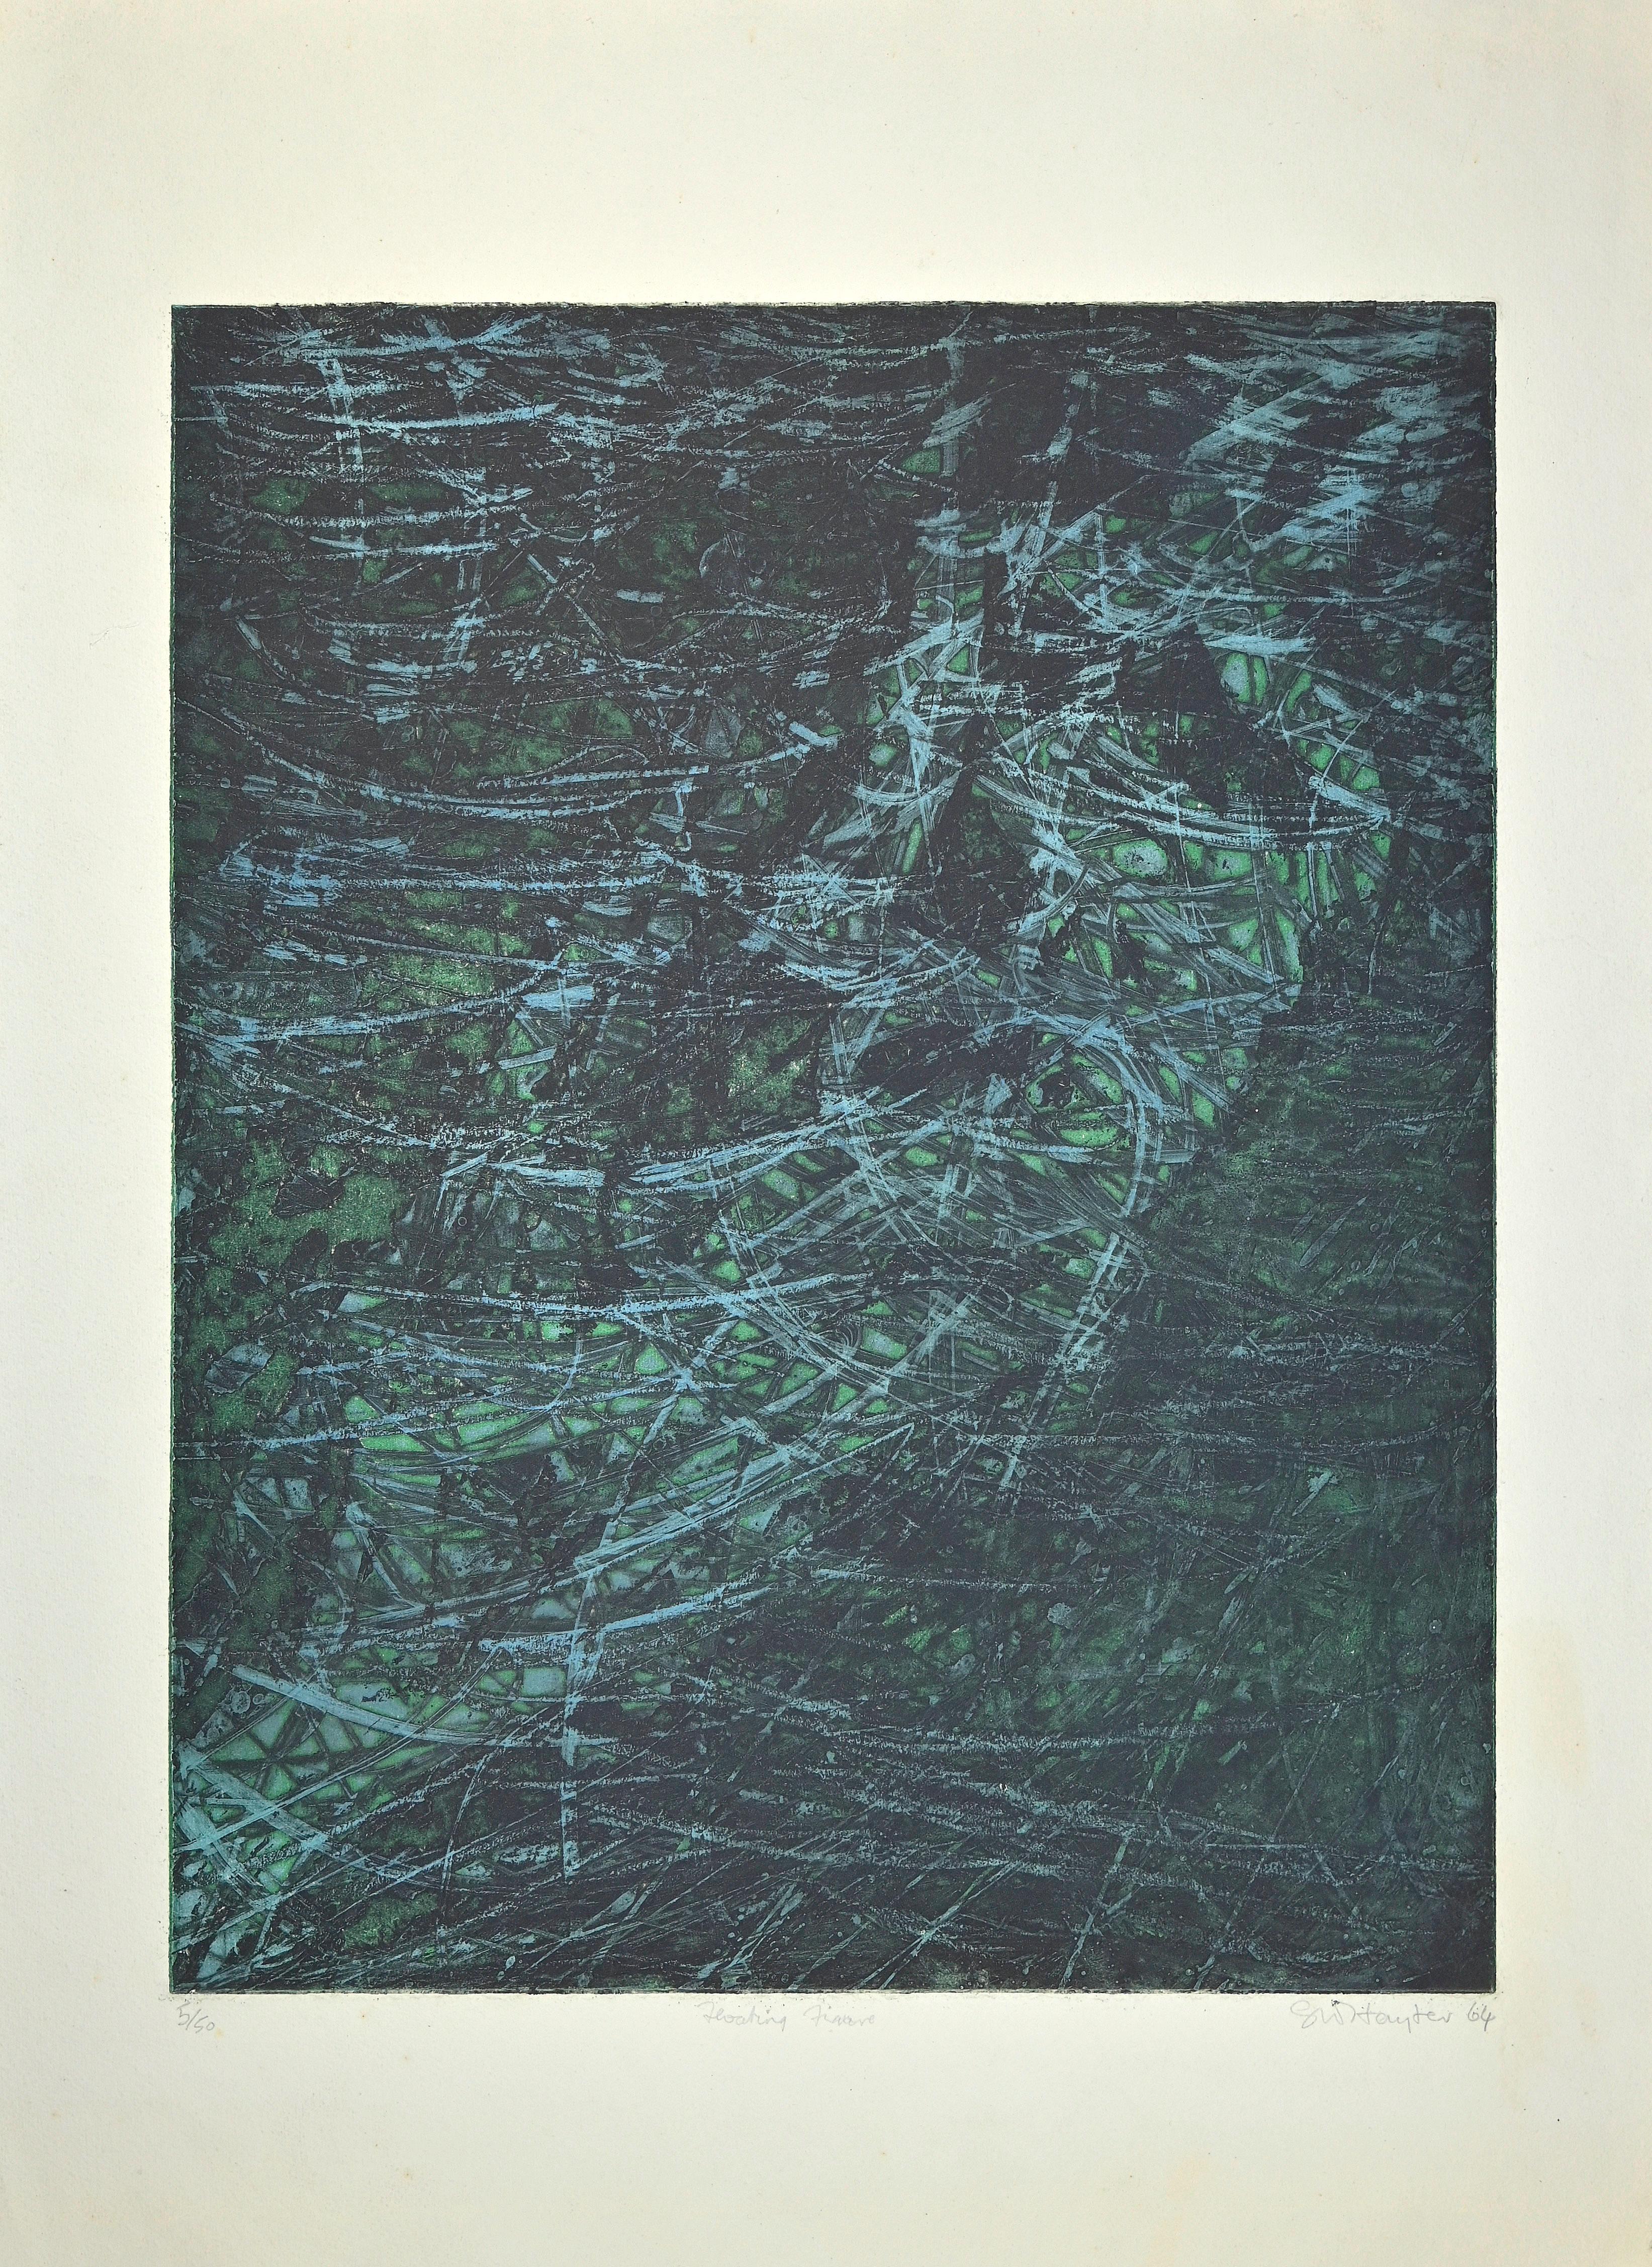 Floating Figure is an artwork realized by Stanley William Hayter in 1964.

Etching Sheet: mm 68x51. Image cm 50x39. 

Ref. Black and  Moorhead, 283.

Hand signed and dated lower right.

Titled lower center and numbered lower left.

Edition 5/50. 